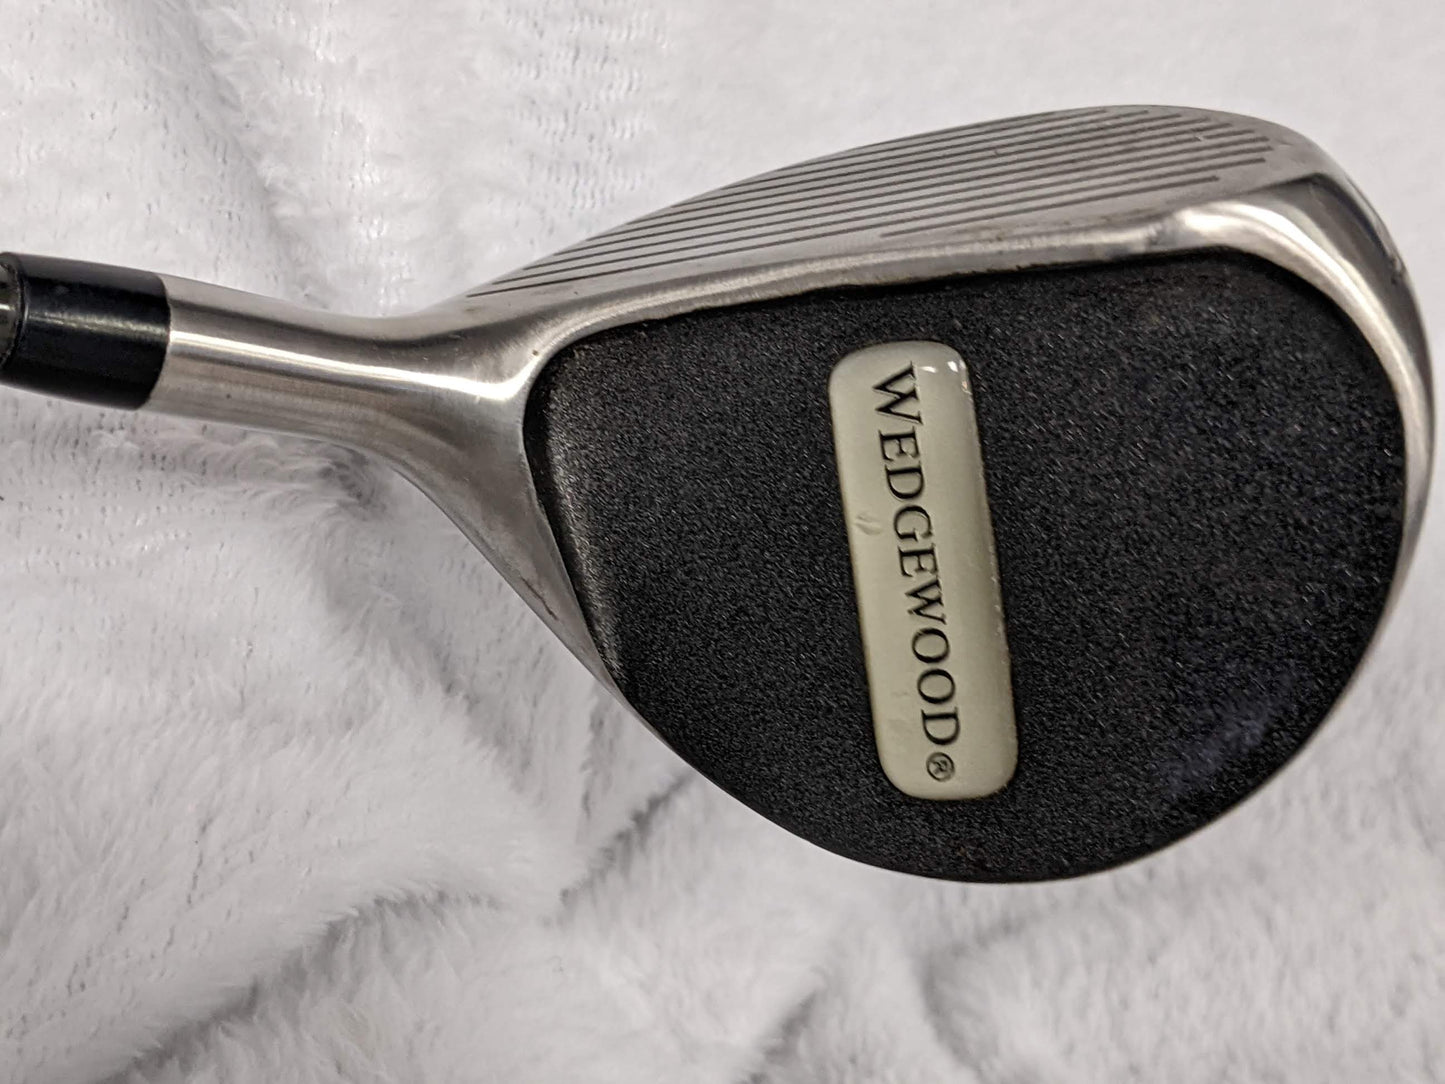 Wedgewood 38 Degree 7-8 Short Iron Golf Club (RH) Size 38 In Color Gray Condition Used